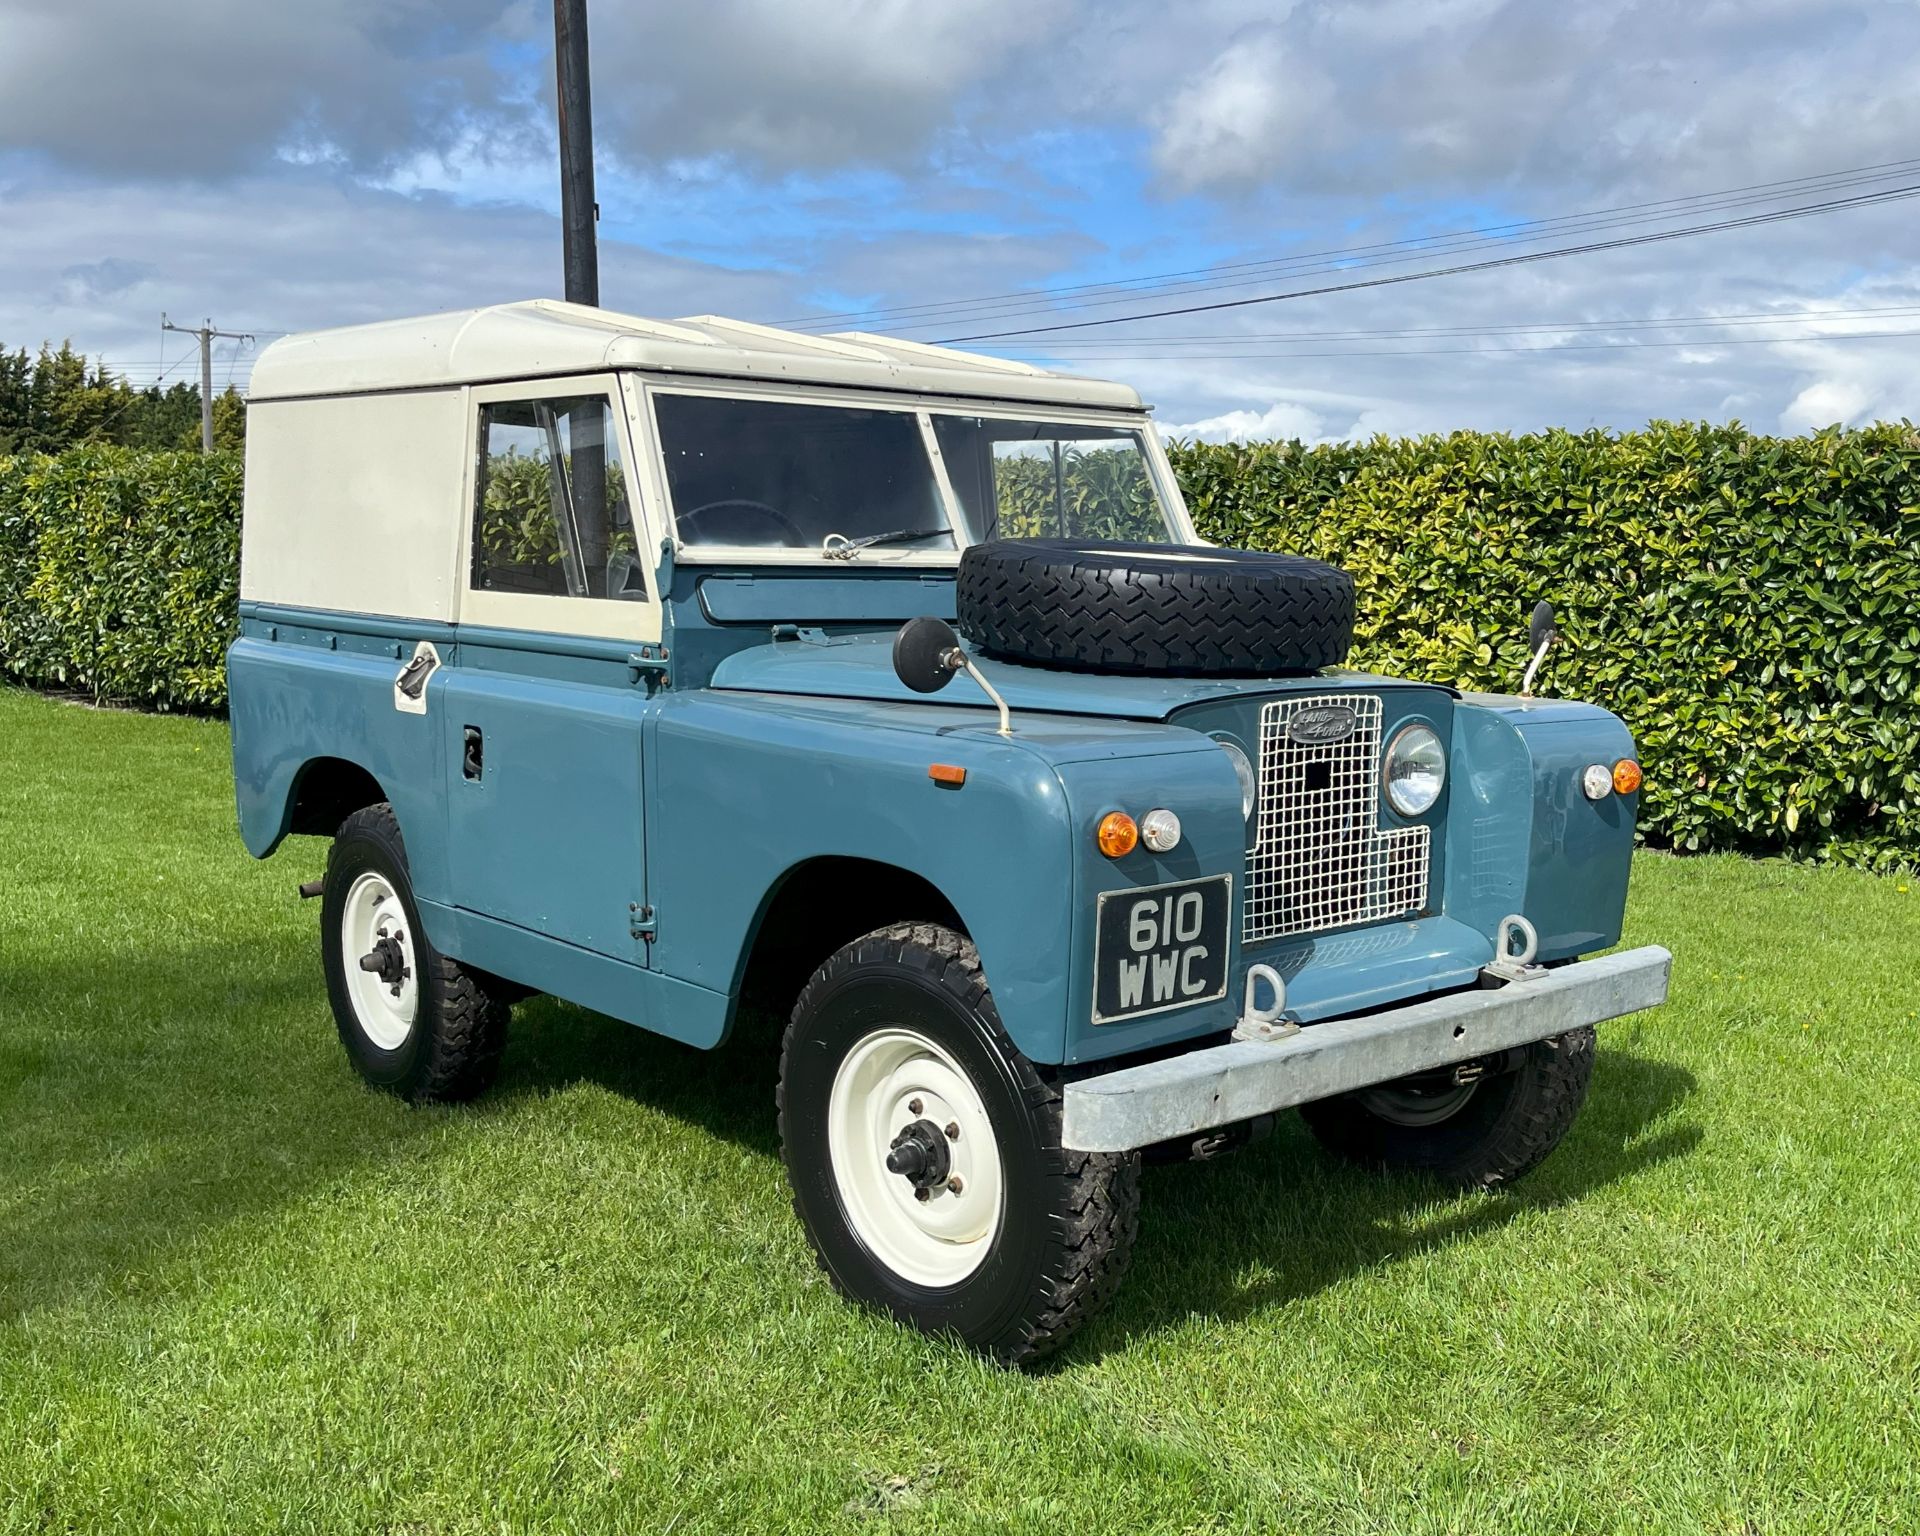 1962 Land Rover 88 Series II, petrol 2.25 litre engine, blue with 64,078 showing on the milometer, - Image 5 of 14